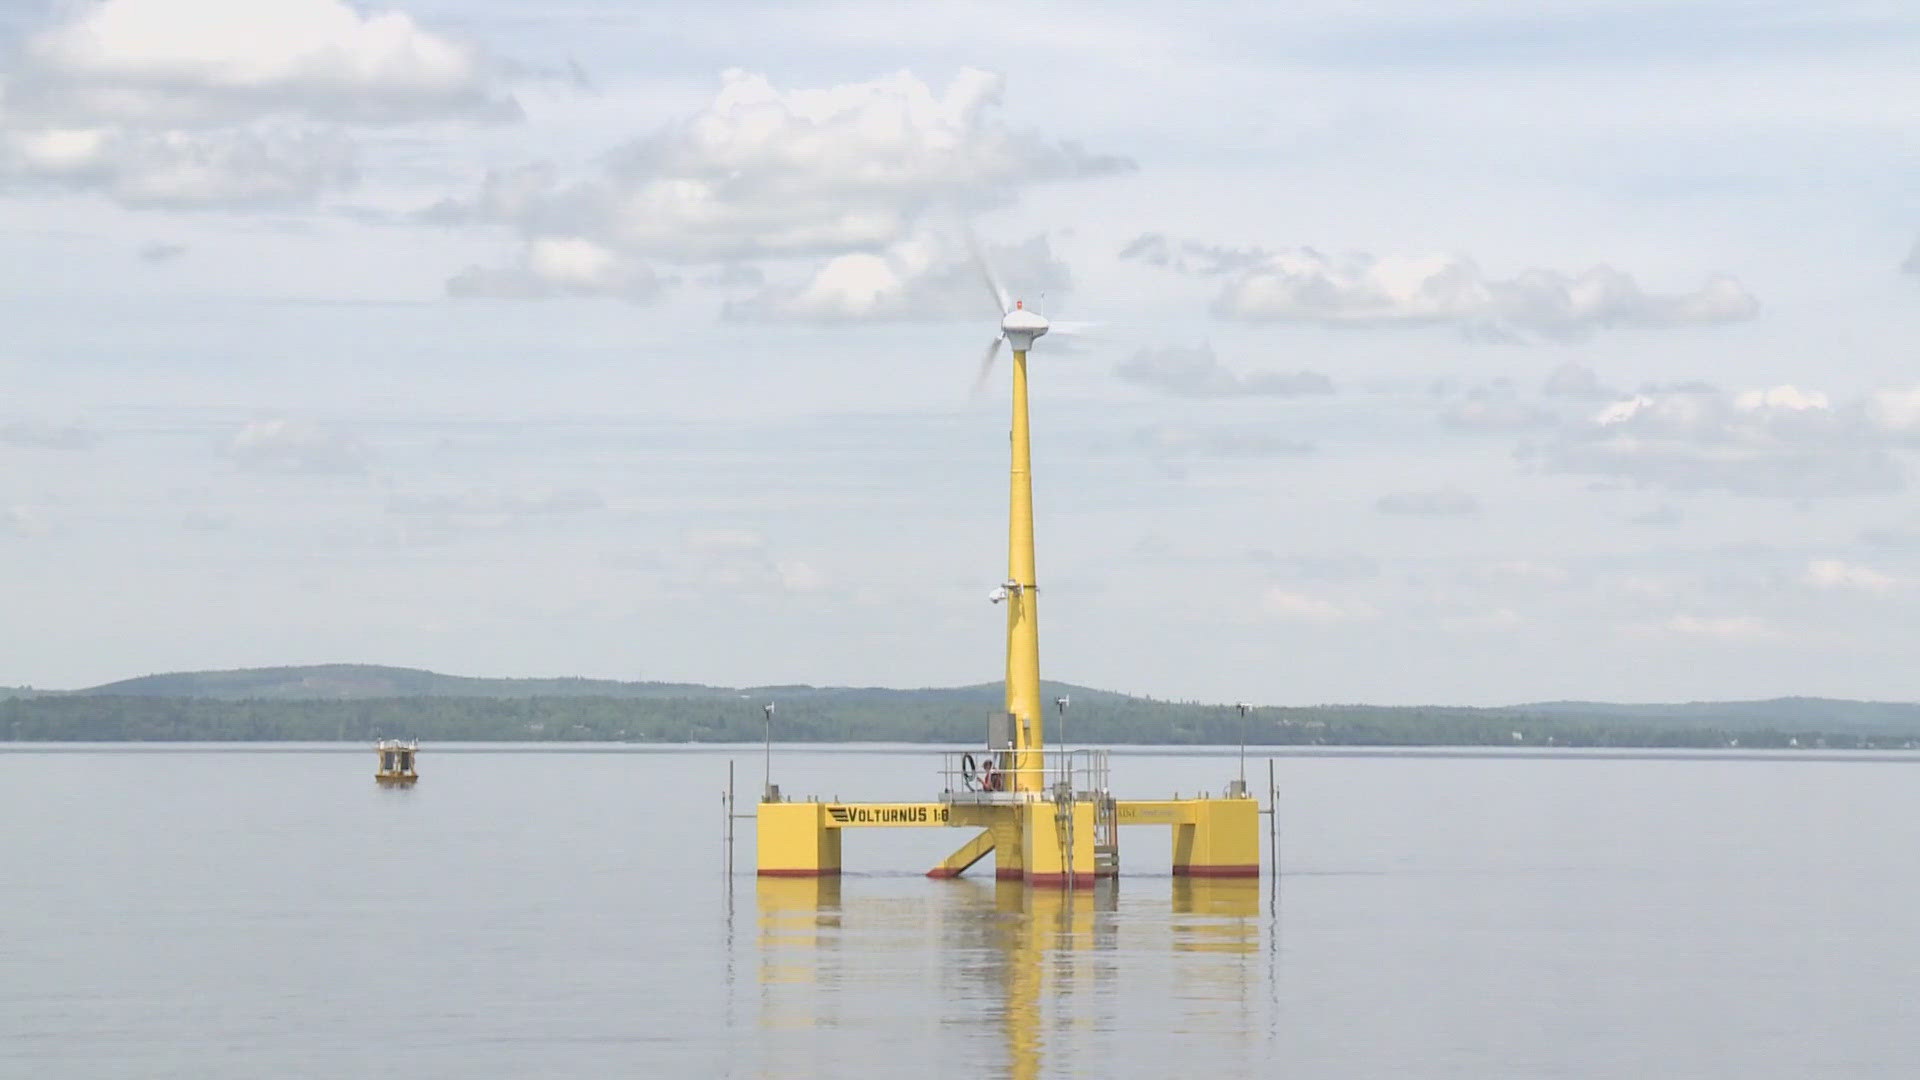 The state of Maine has proposed putting 12 offshore wind turbines atop University of Maine-developed floating platforms.